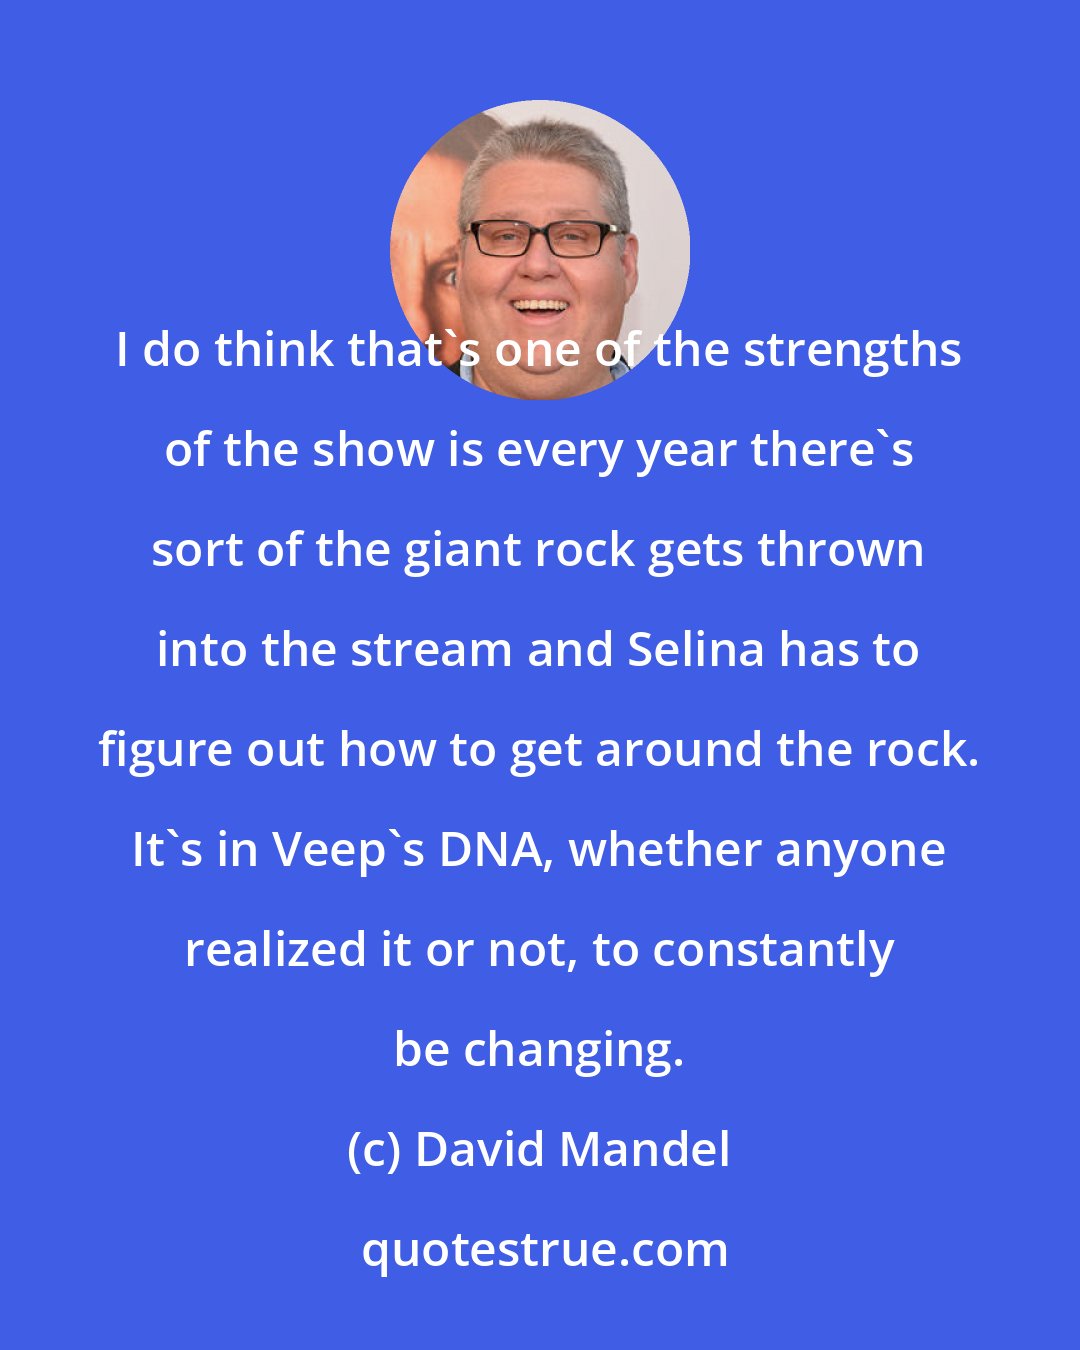 David Mandel: I do think that's one of the strengths of the show is every year there's sort of the giant rock gets thrown into the stream and Selina has to figure out how to get around the rock. It's in Veep's DNA, whether anyone realized it or not, to constantly be changing.